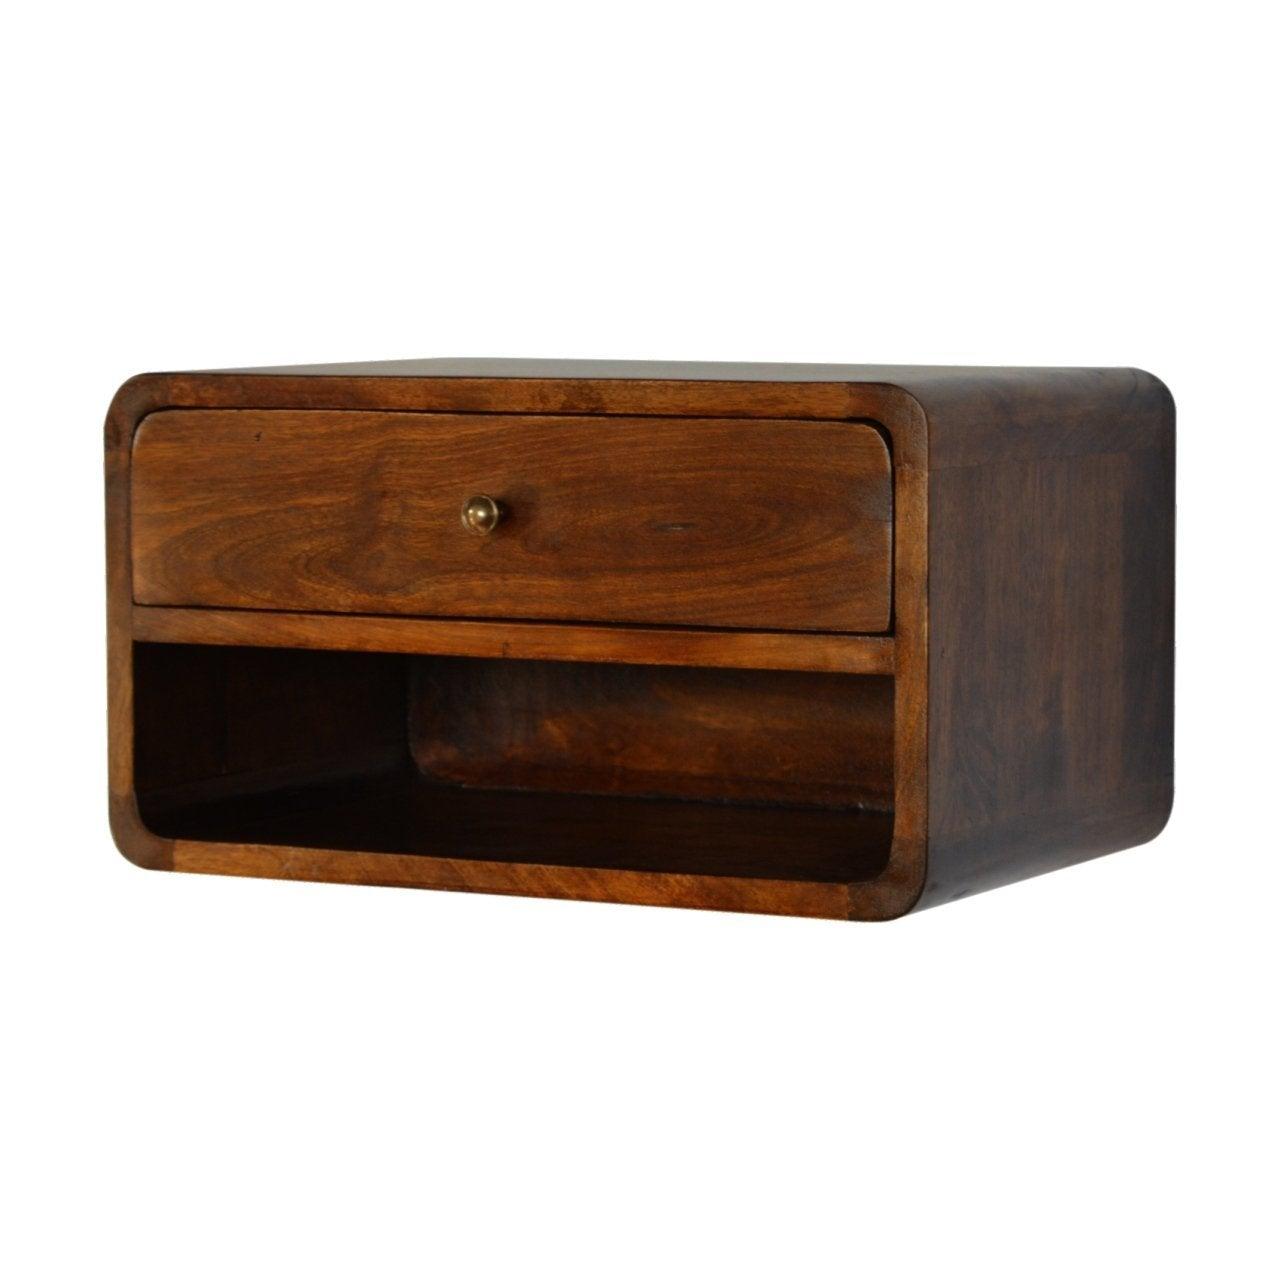 Curved chestnut wall mounted bedside table with open slot - crimblefest furniture - image 2